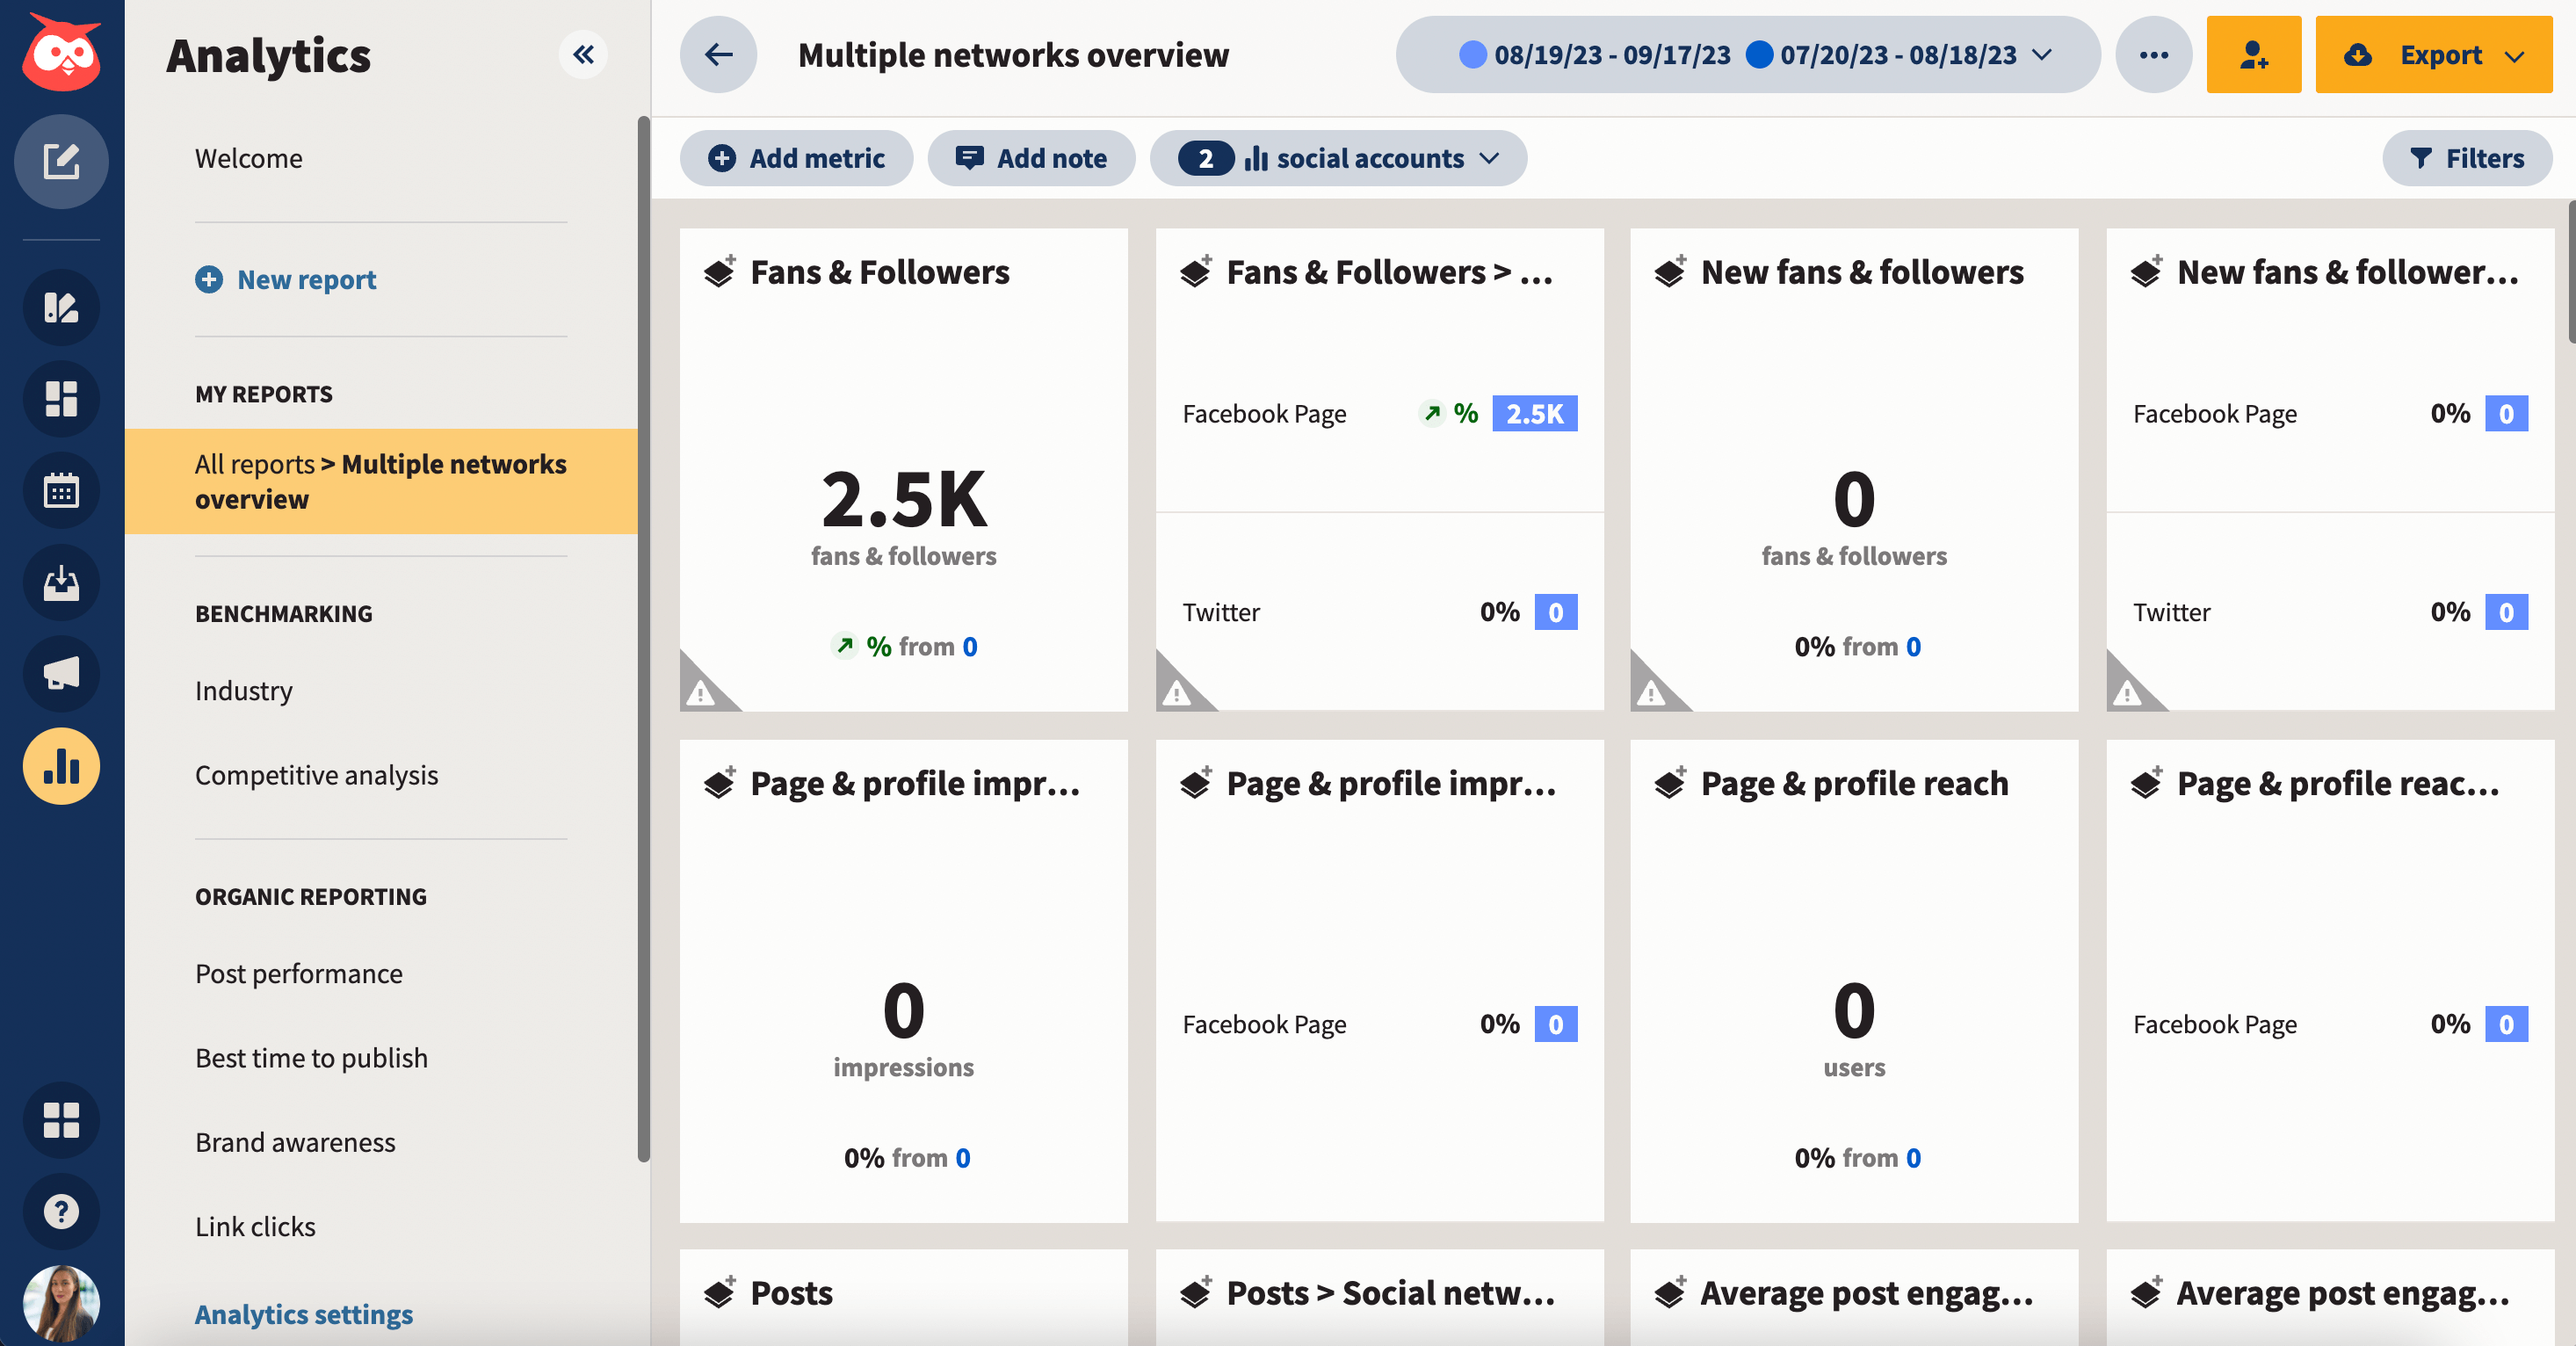 Hootsuite analytics page for Multiple networks overview, showing various reports such as Fans & followers count, Page & profile impressions, or Posts engagement.